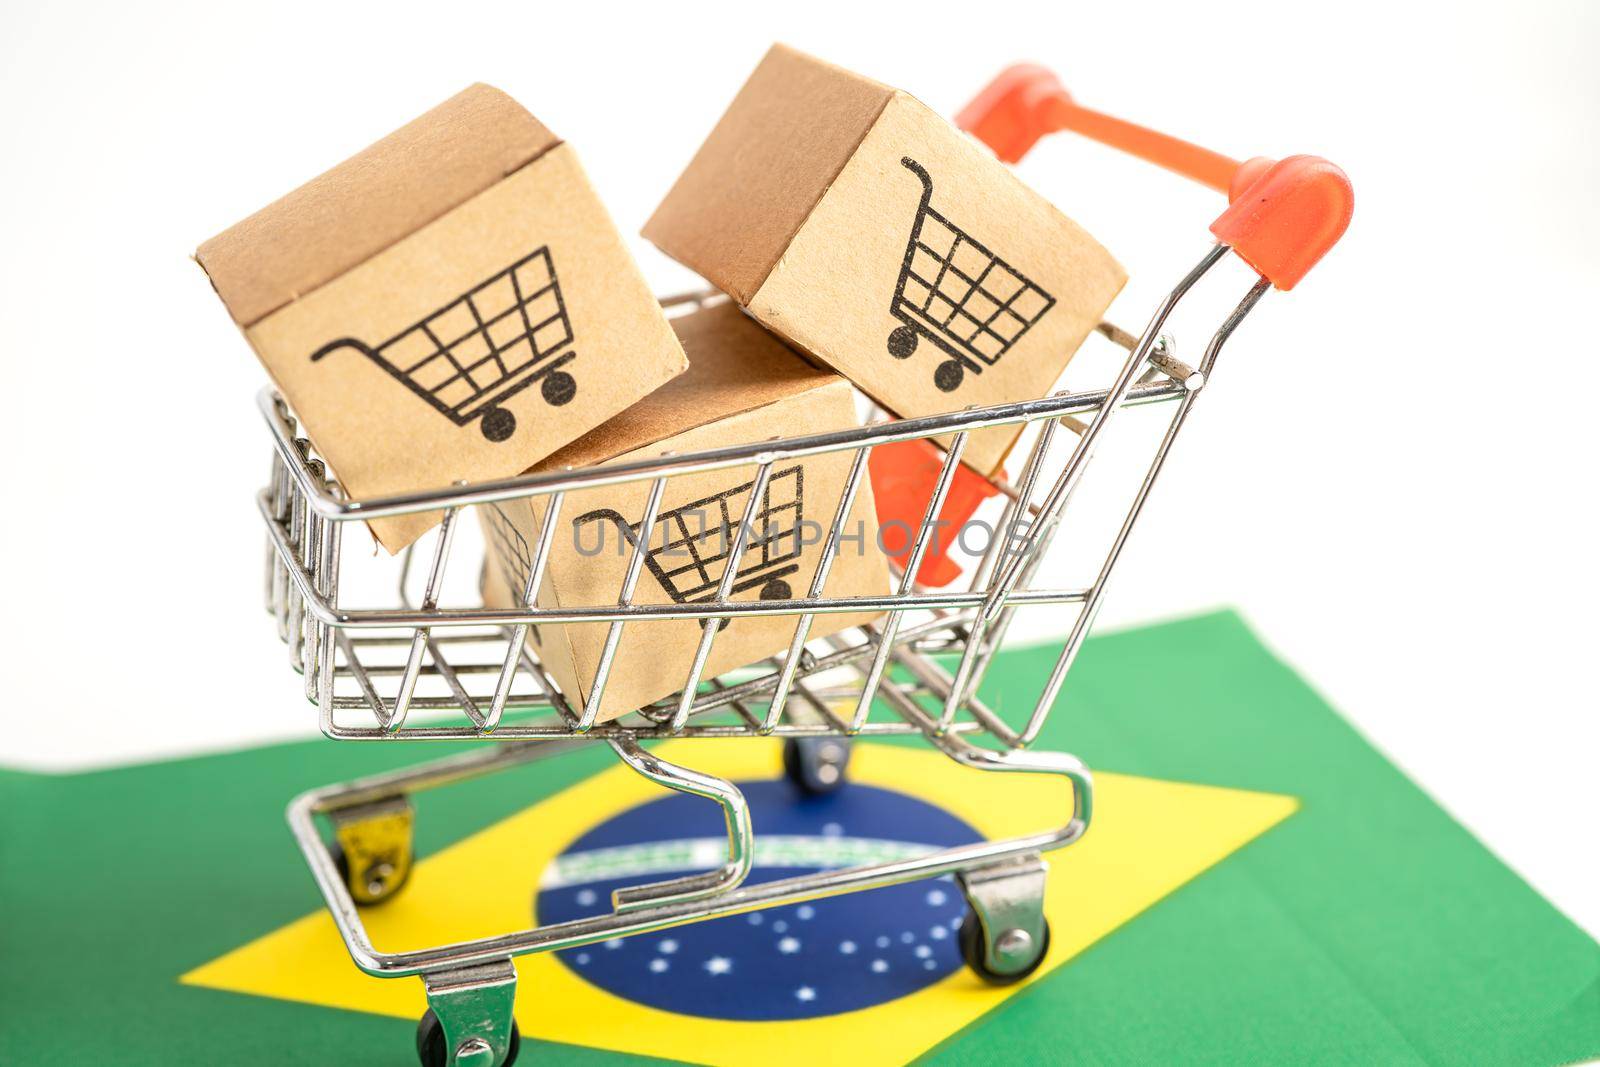 Box with shopping cart logo and Brazil flag, Import Export Shopping online or eCommerce finance delivery service store product shipping, trade, supplier concept. by pamai